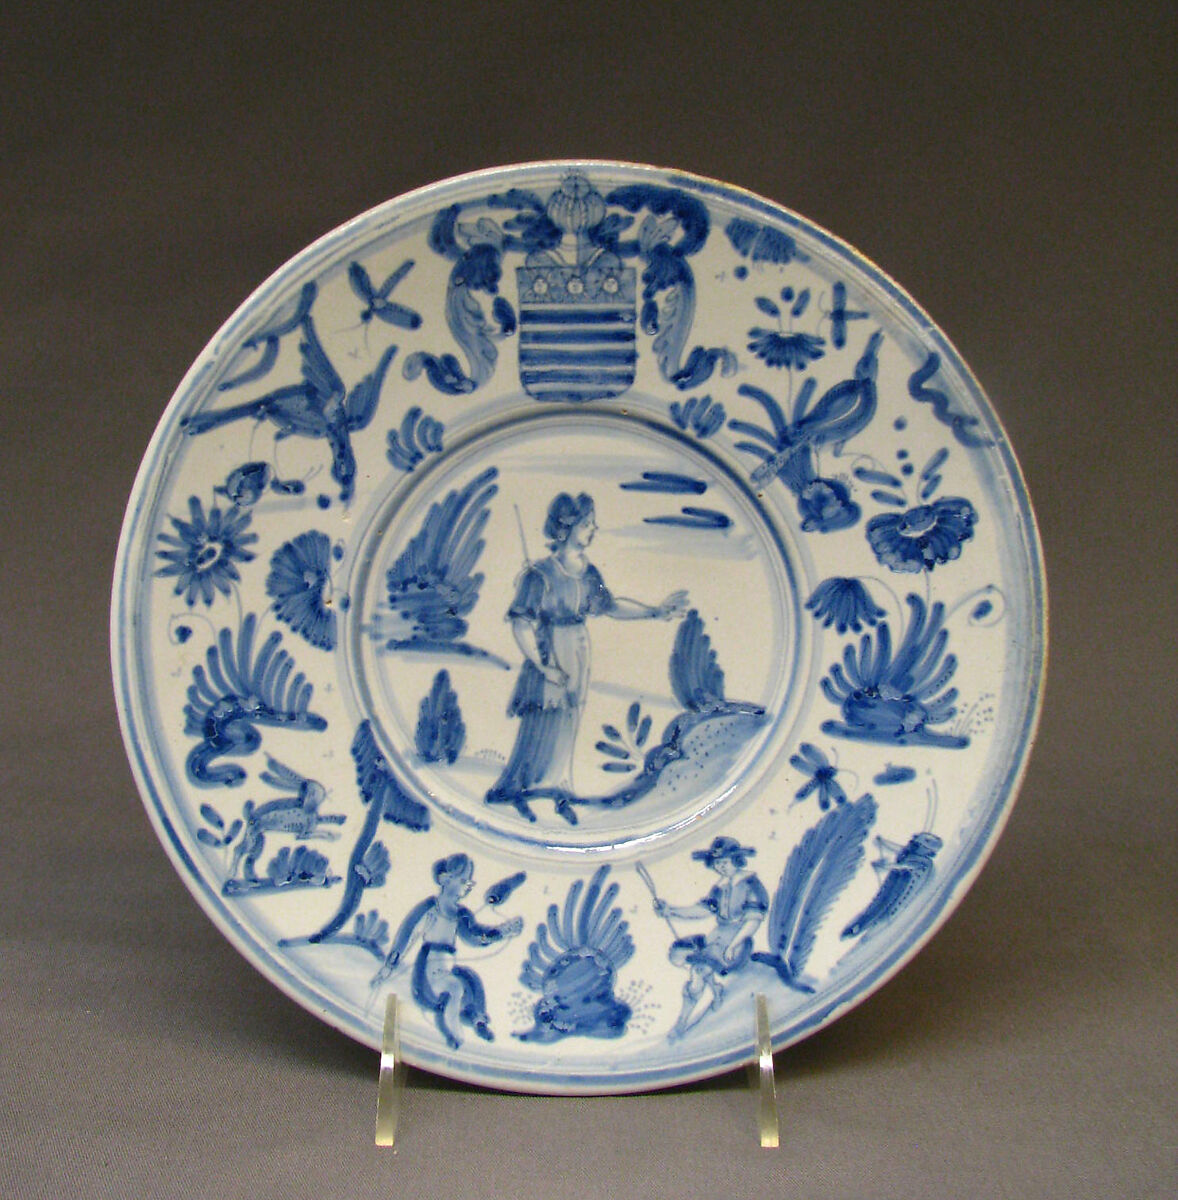 Plate, Faience (tin-glazed earthenware), probably French, Nevers